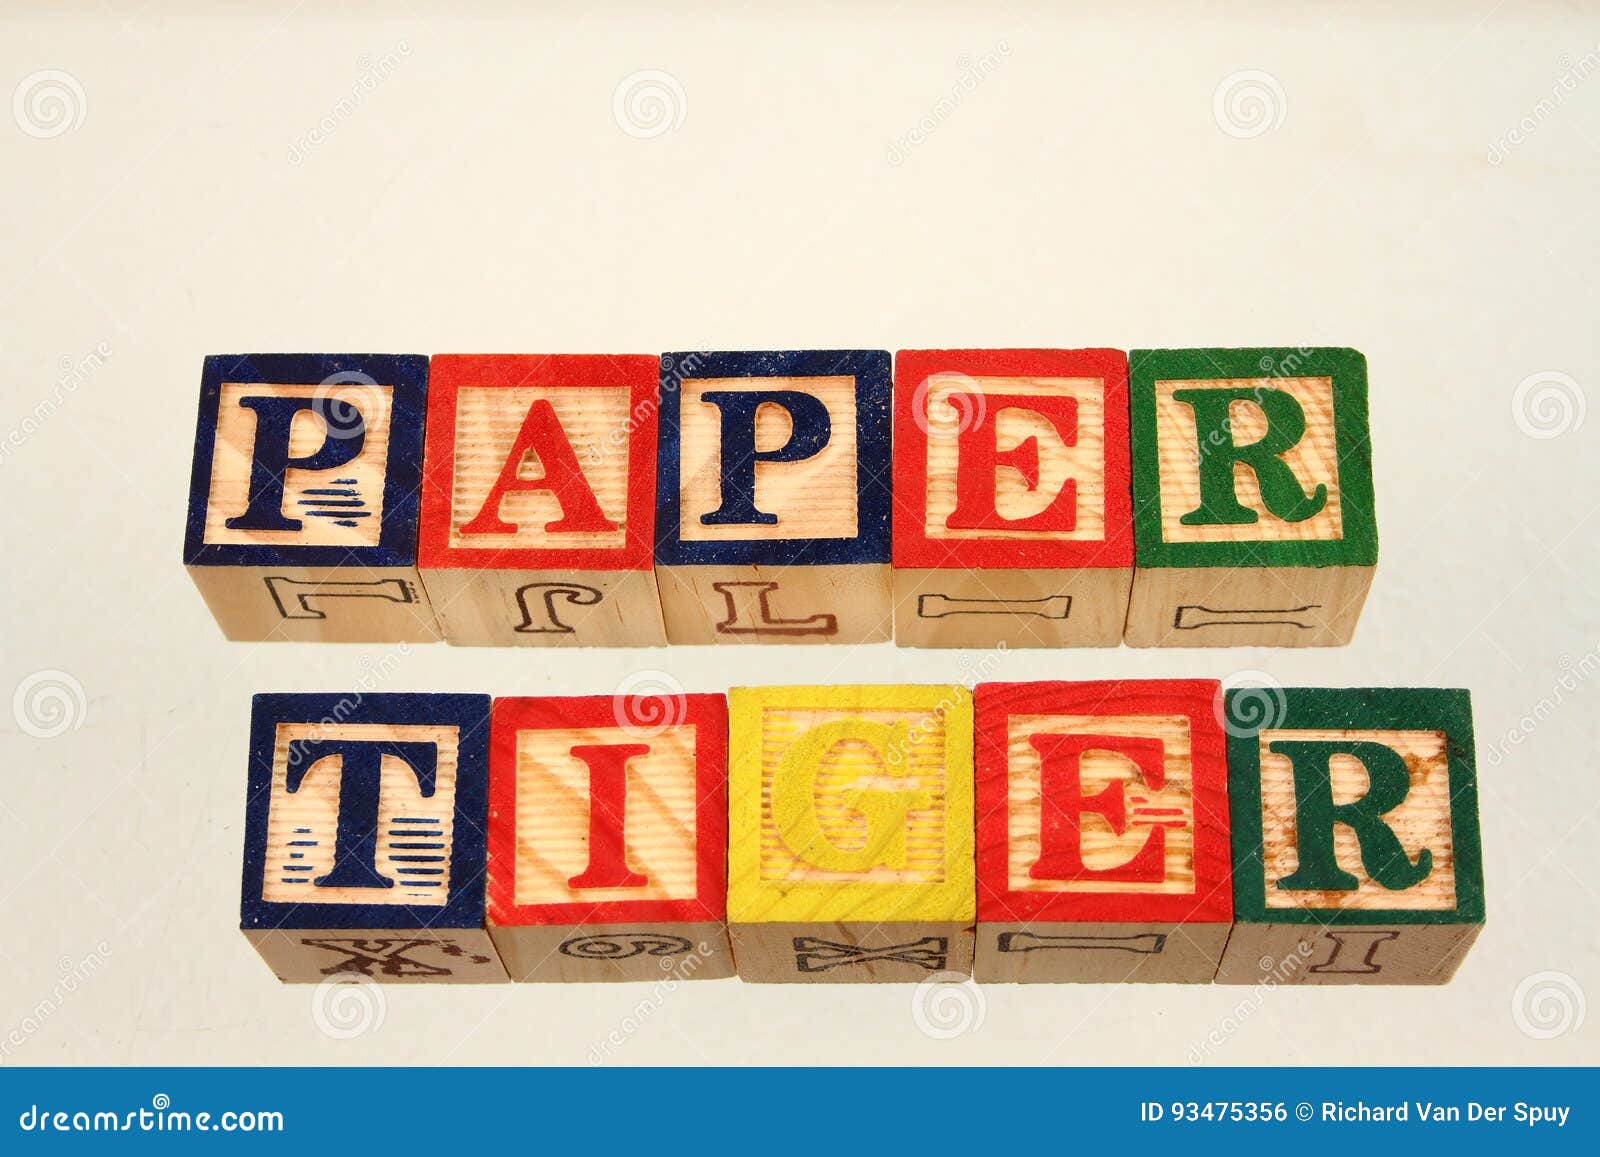 what does the term paper tiger mean